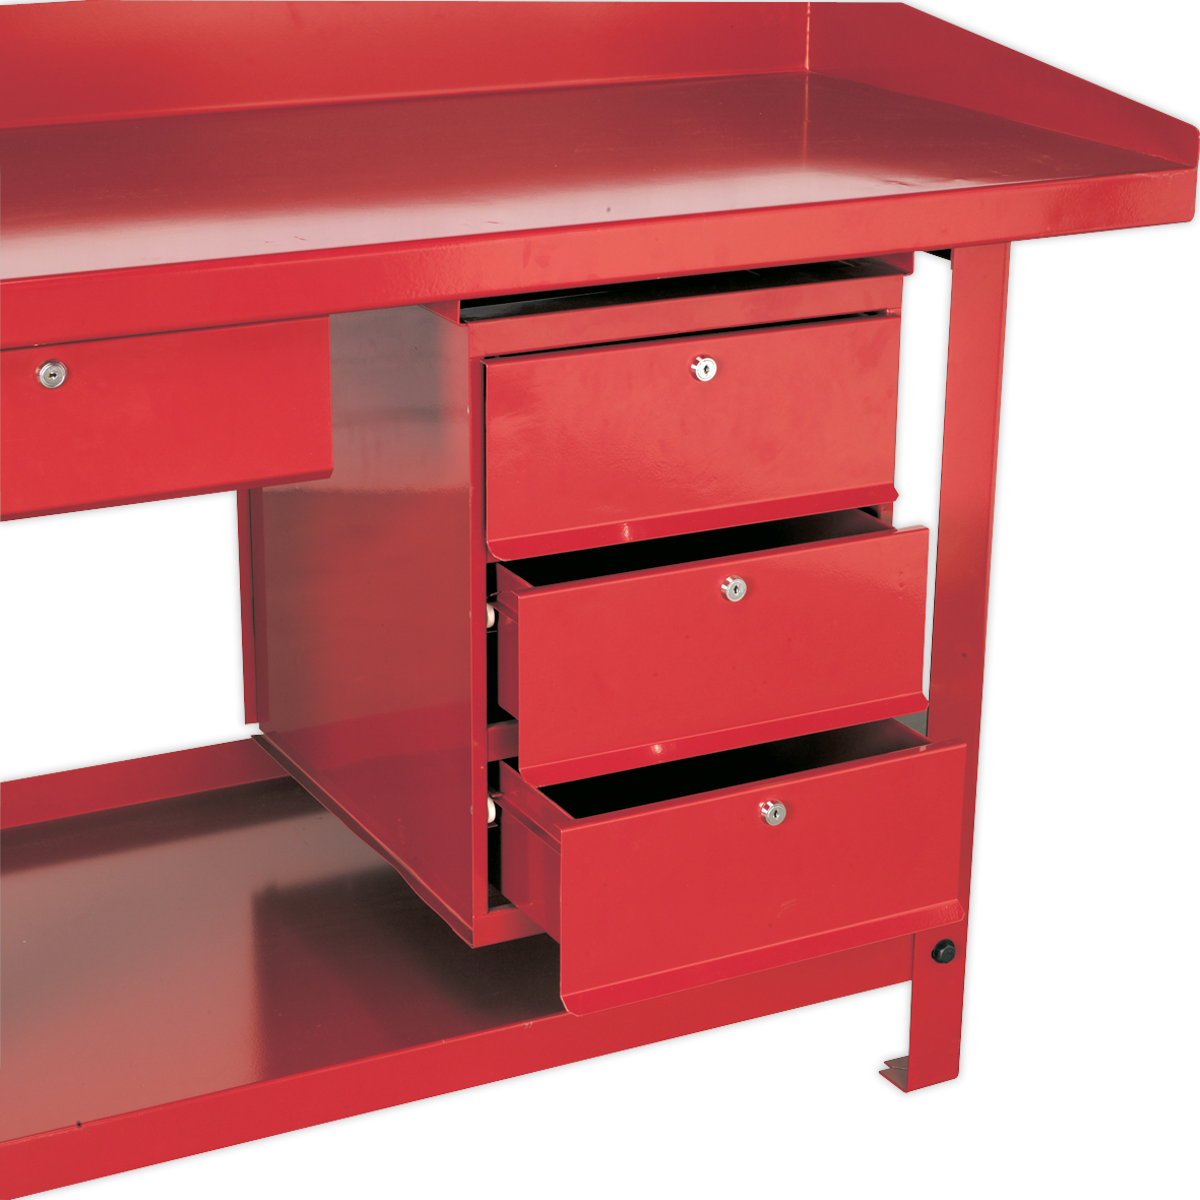 Sealey 3 Drawer Unit for AP10 & AP30 Series Benches